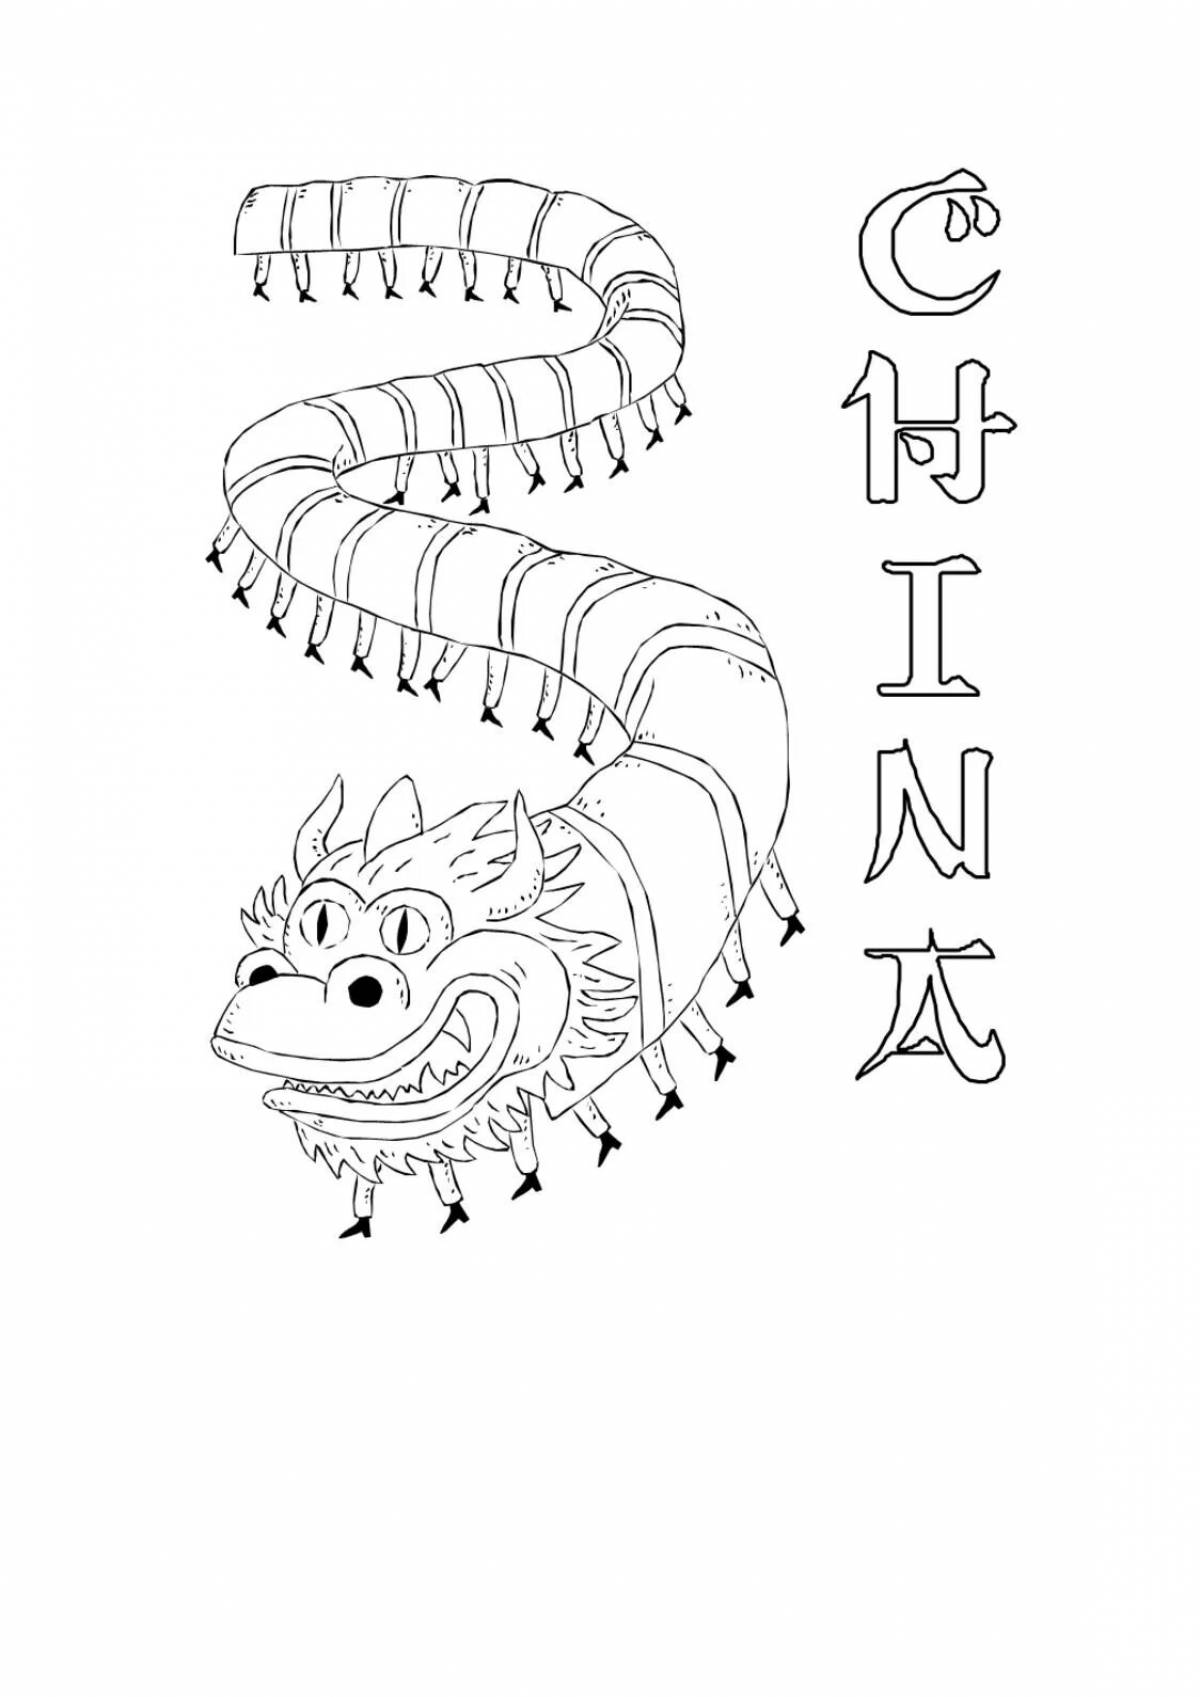 Chinese dynamic coloring book for kids